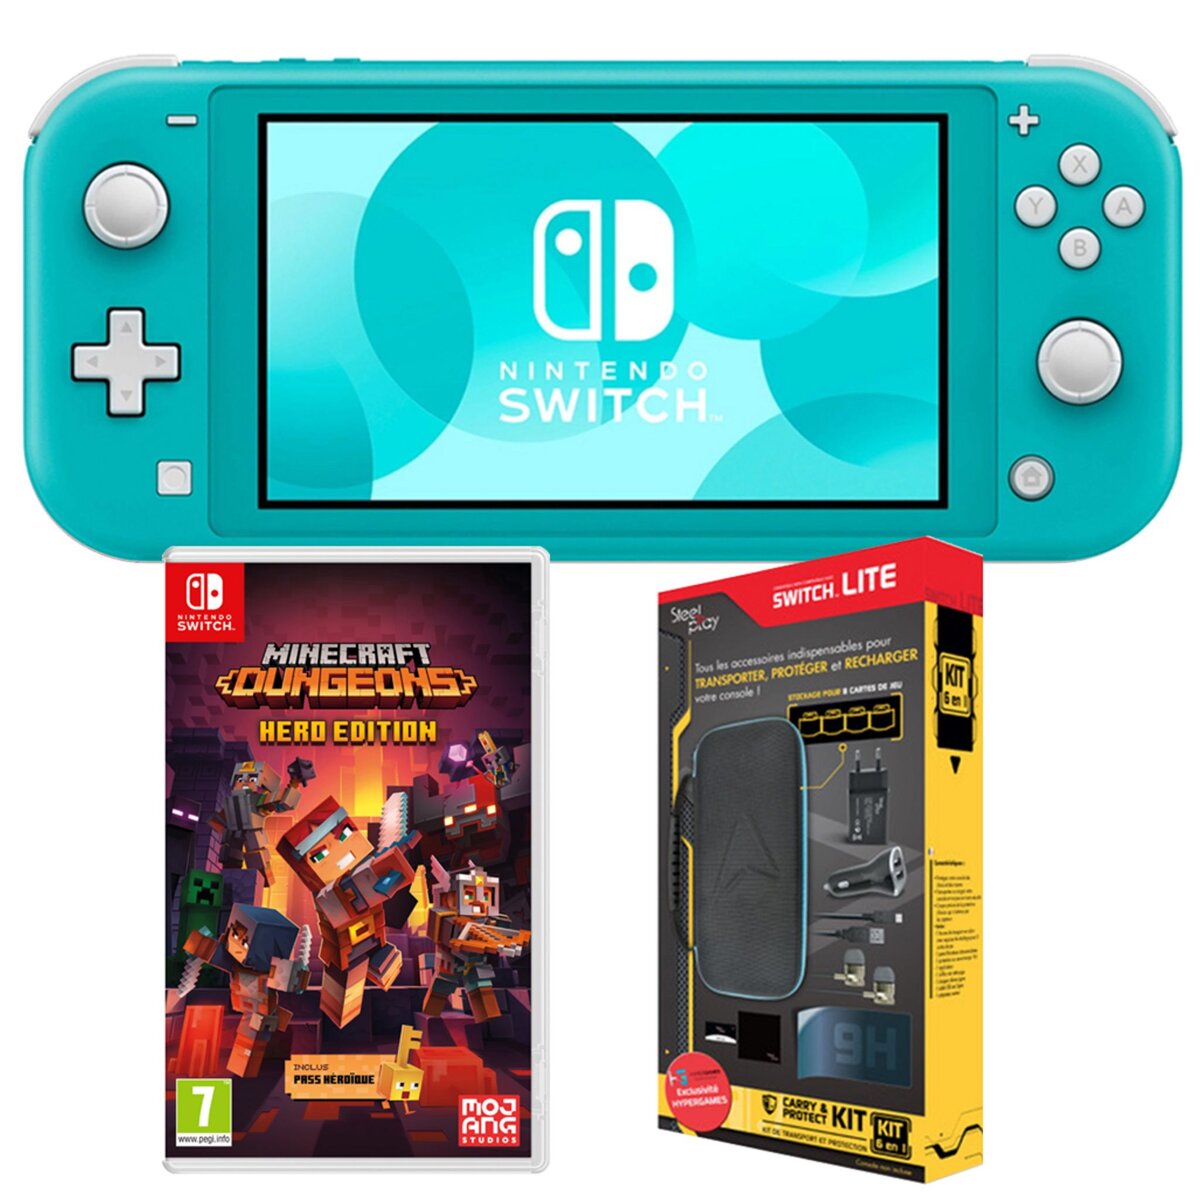 NINTENDO EXCLU WEB Console Nintendo Switch Lite Turquoise + Minecraft Dungeons + Pack Exclu 6 Accessoires